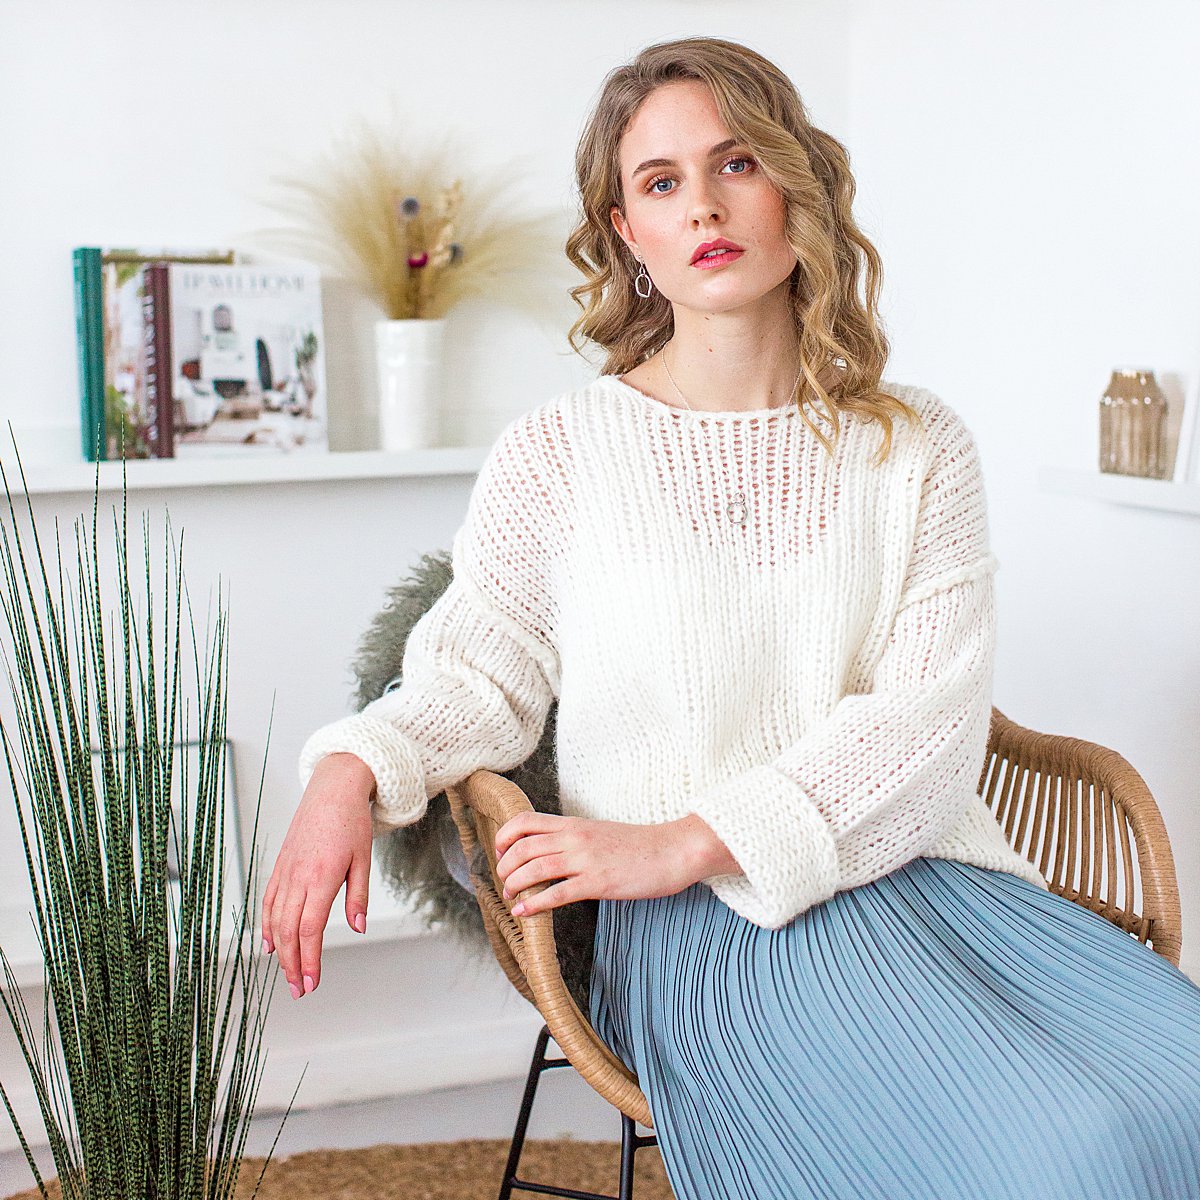 Lifestyle and fashion photography shoot for Jo&Co. Styled lifestyle editorial photography by Marianne Taylor.